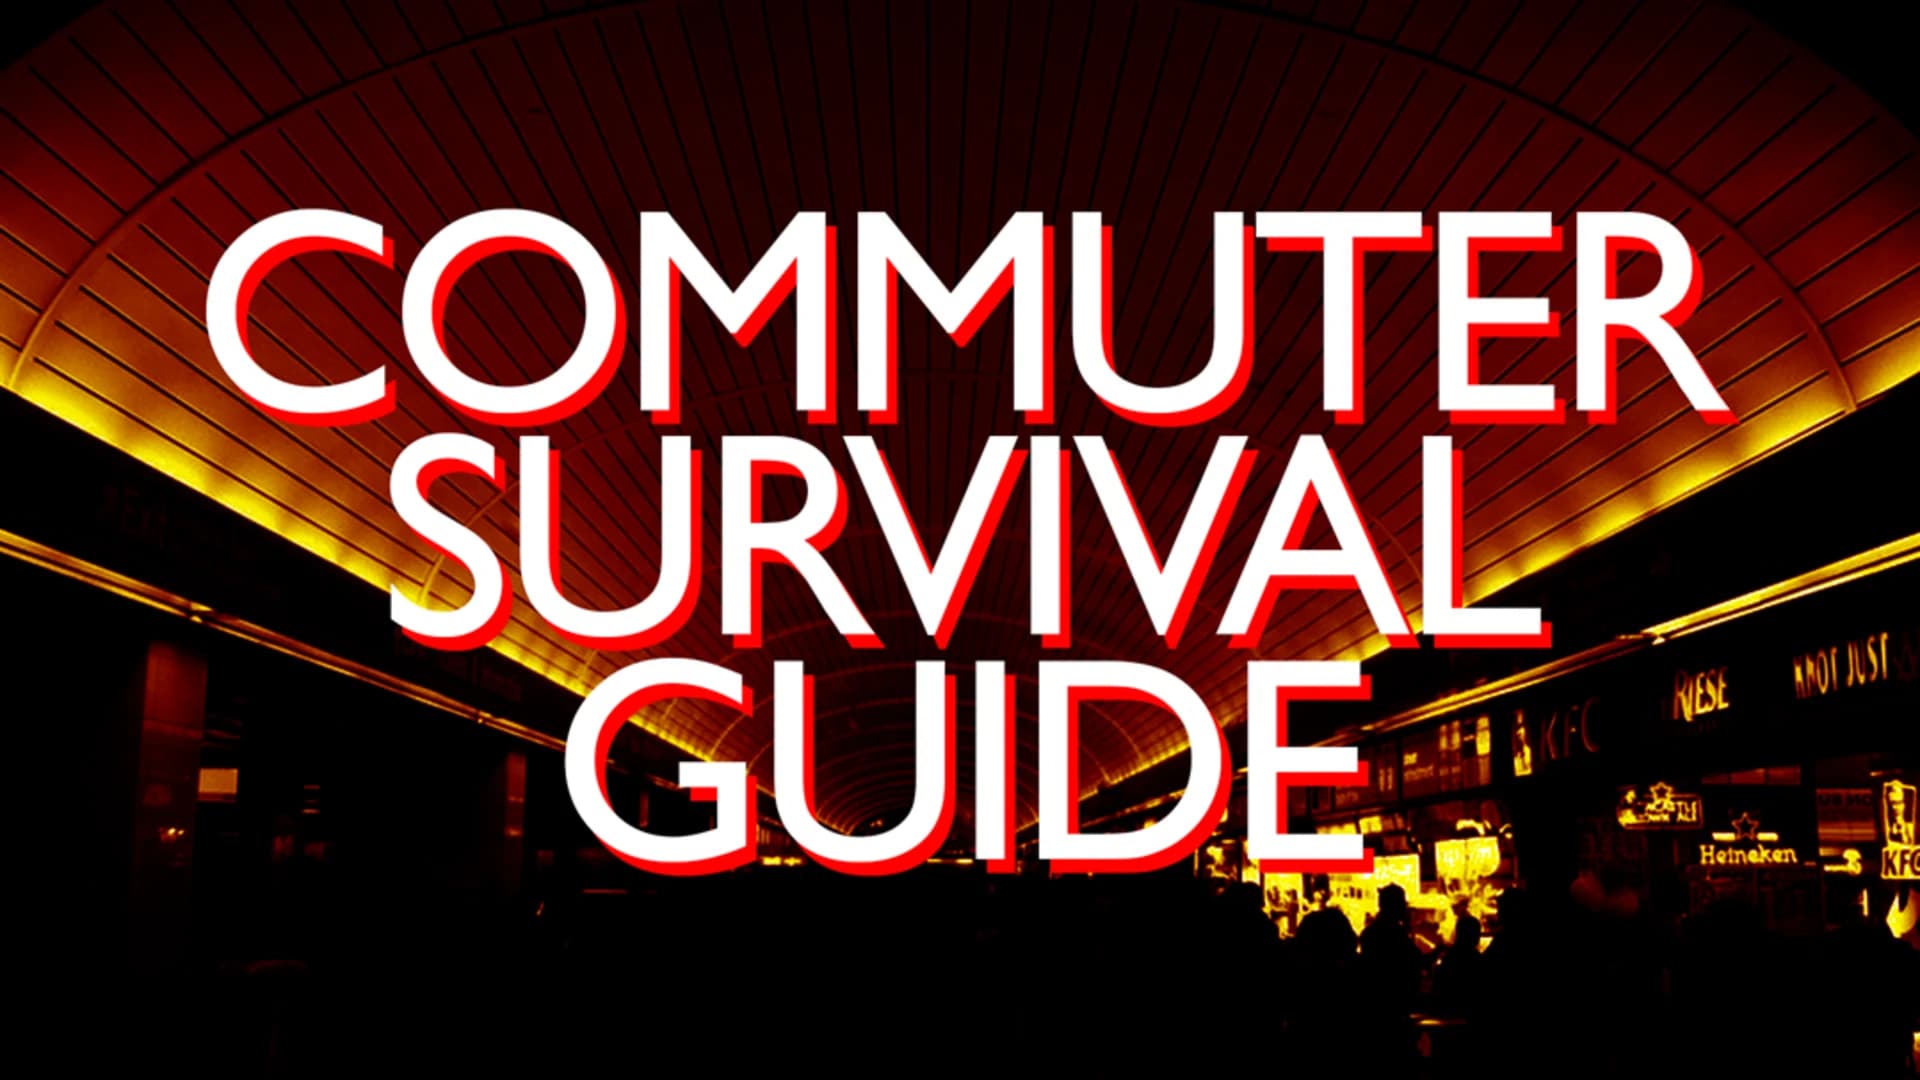 SUMMER OF HELL SURVIVAL GUIDE - RESOURCES FOR YOUR COMMUTE